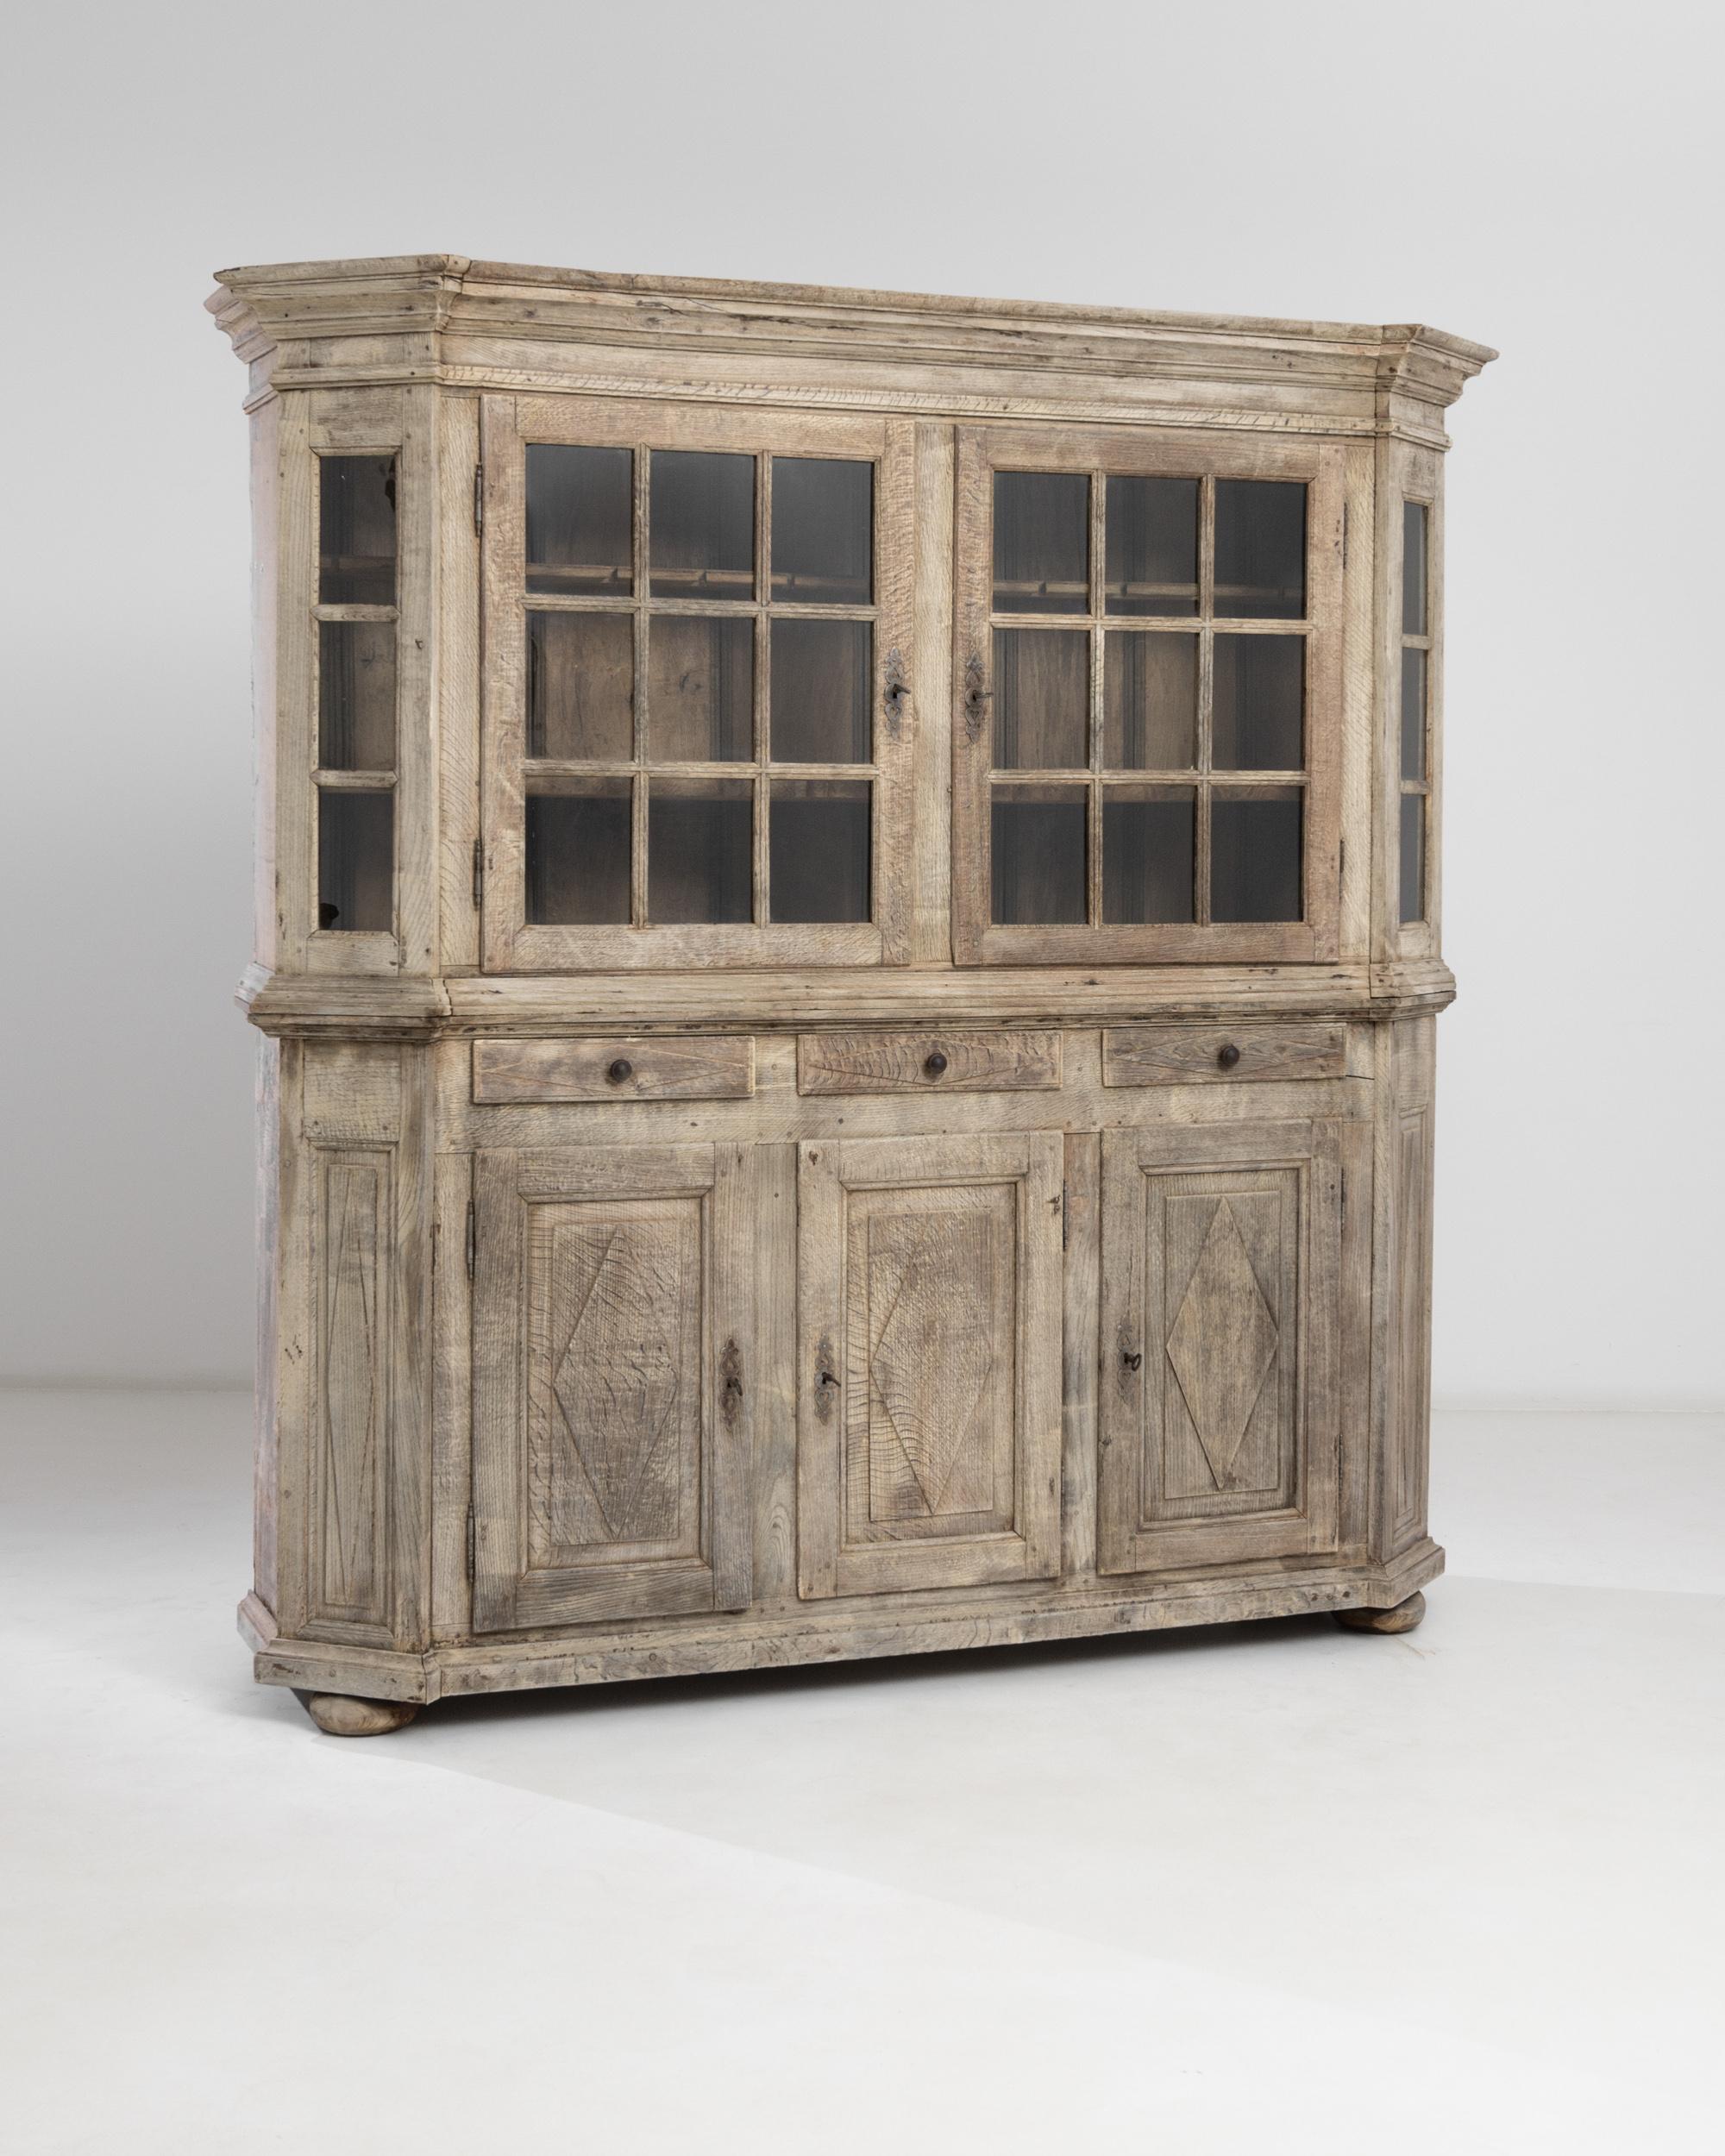 This spacious oak vitrine made in France circa 1800 has a remarkable faceted shape that provides extra storage space and gives the chest a peculiar silhouette punctuated by the geometric carvings on the panel doors and the molded cornice with